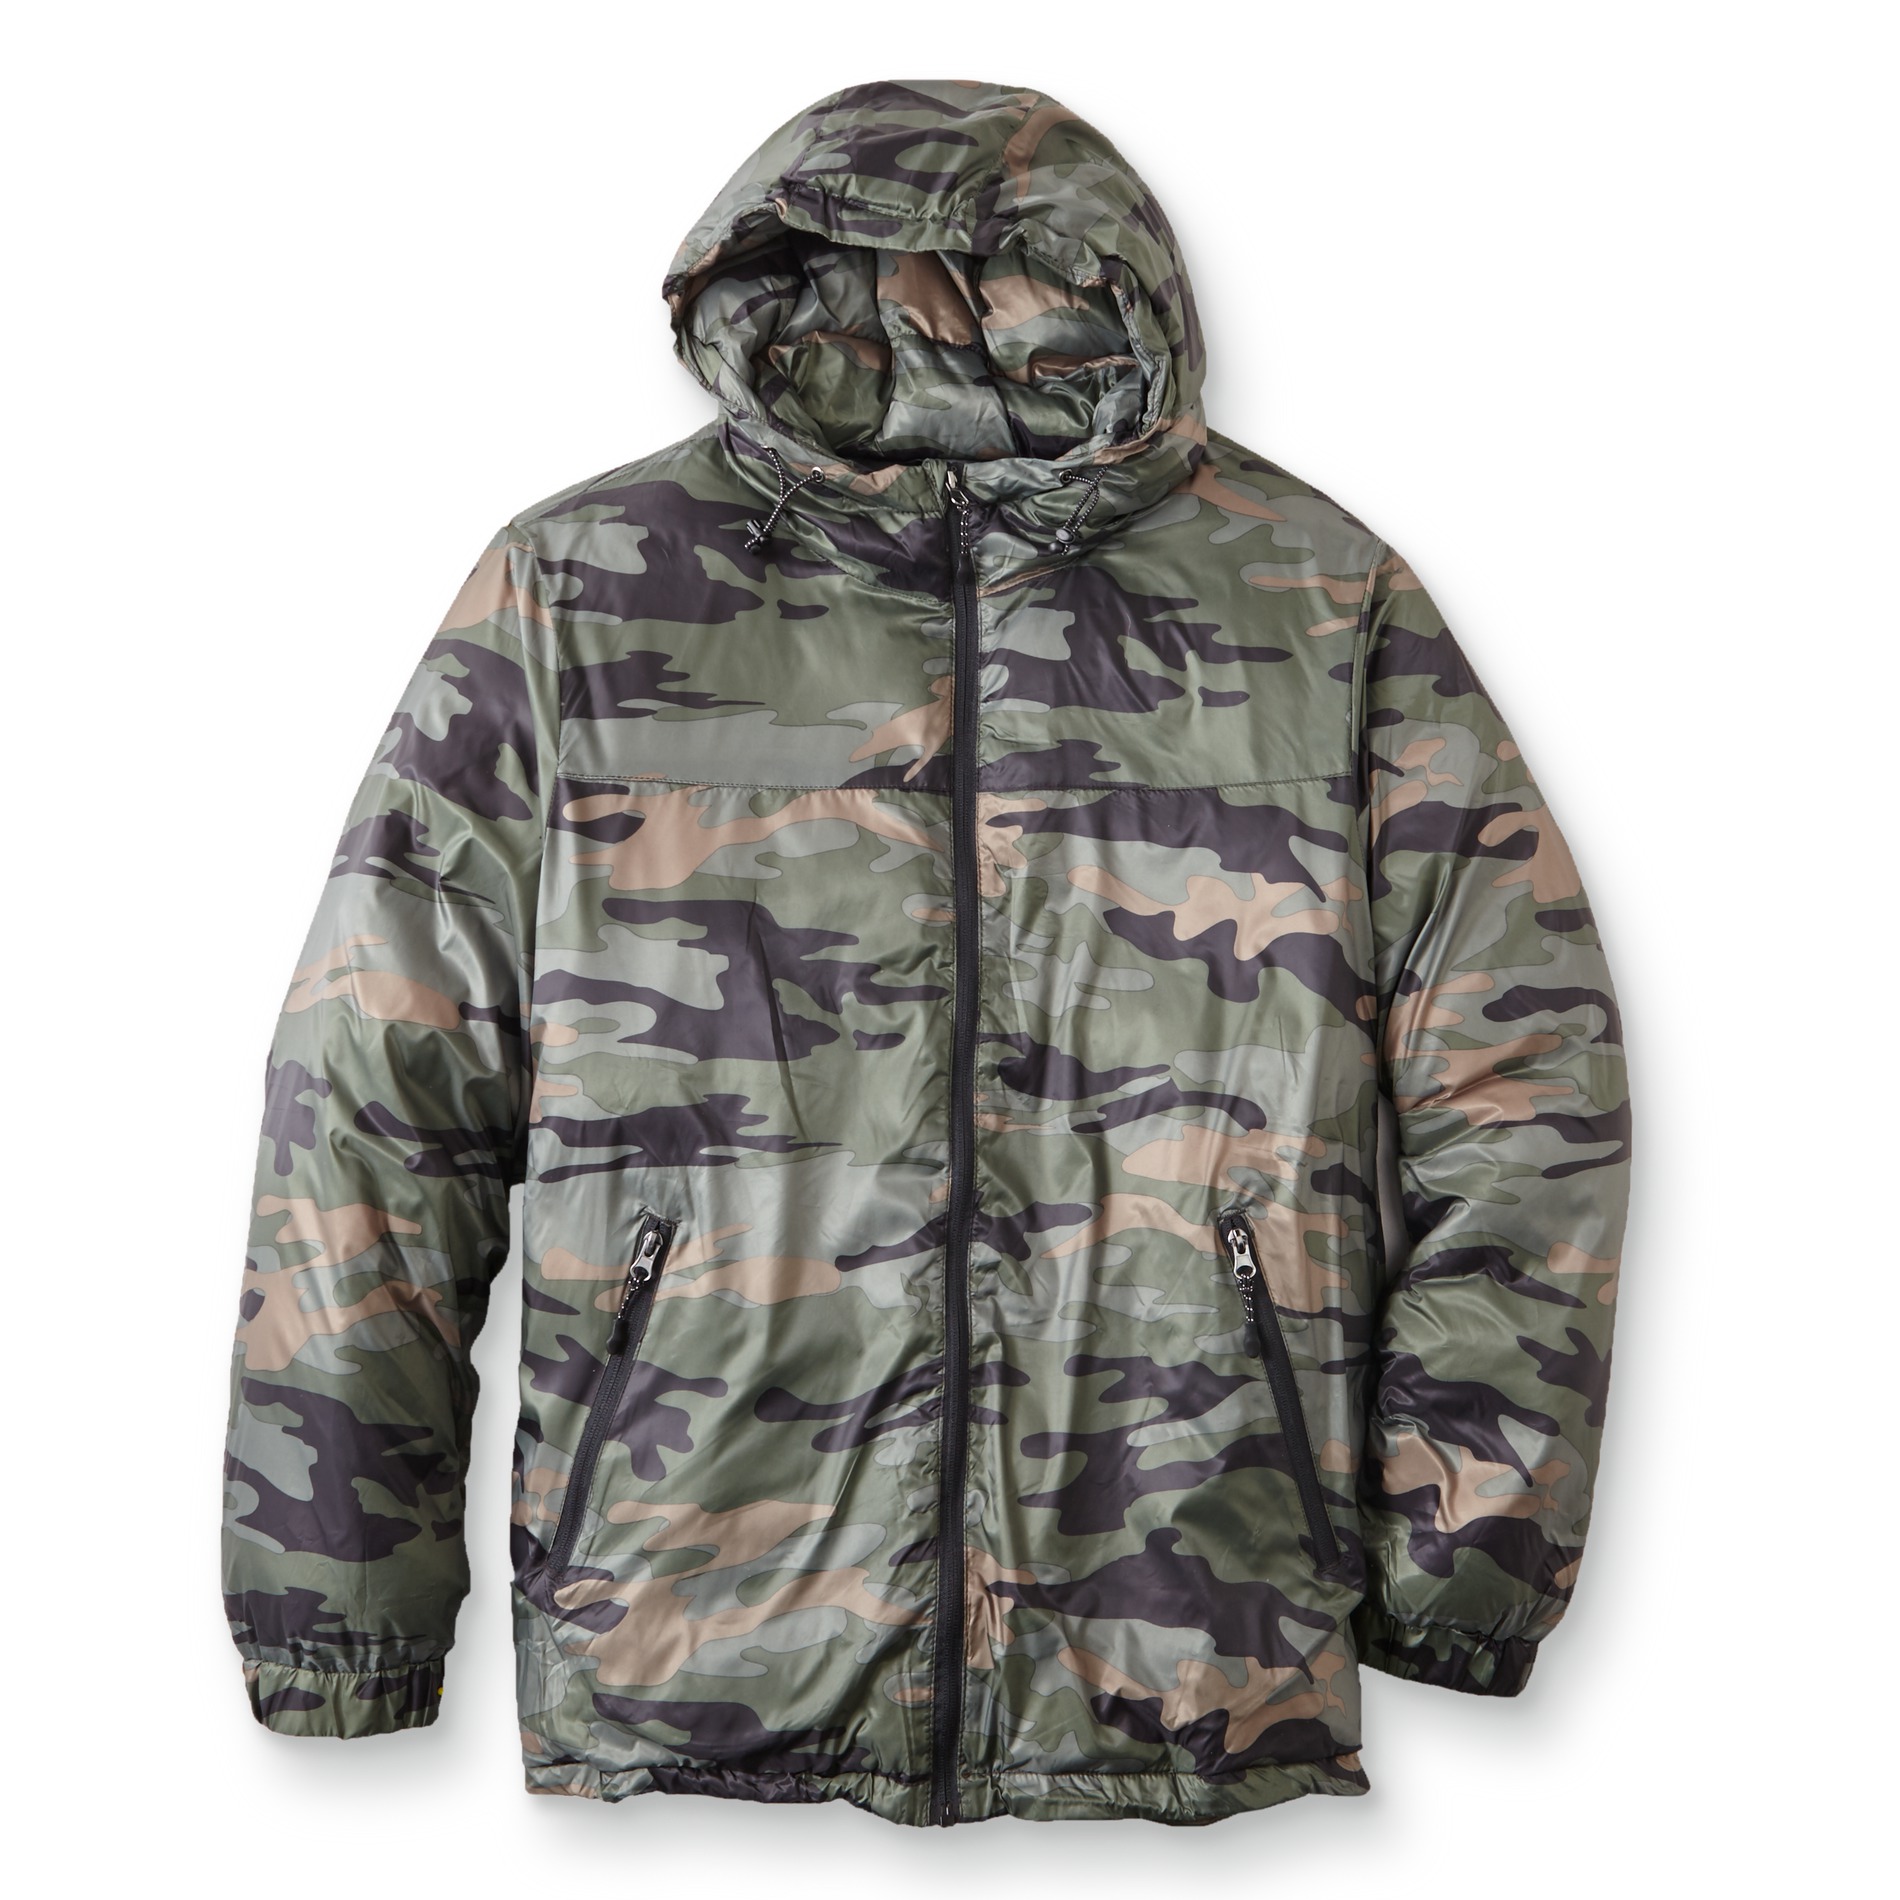 Outdoor Life Men's Hooded Puffer Jacket-Camouflage Print